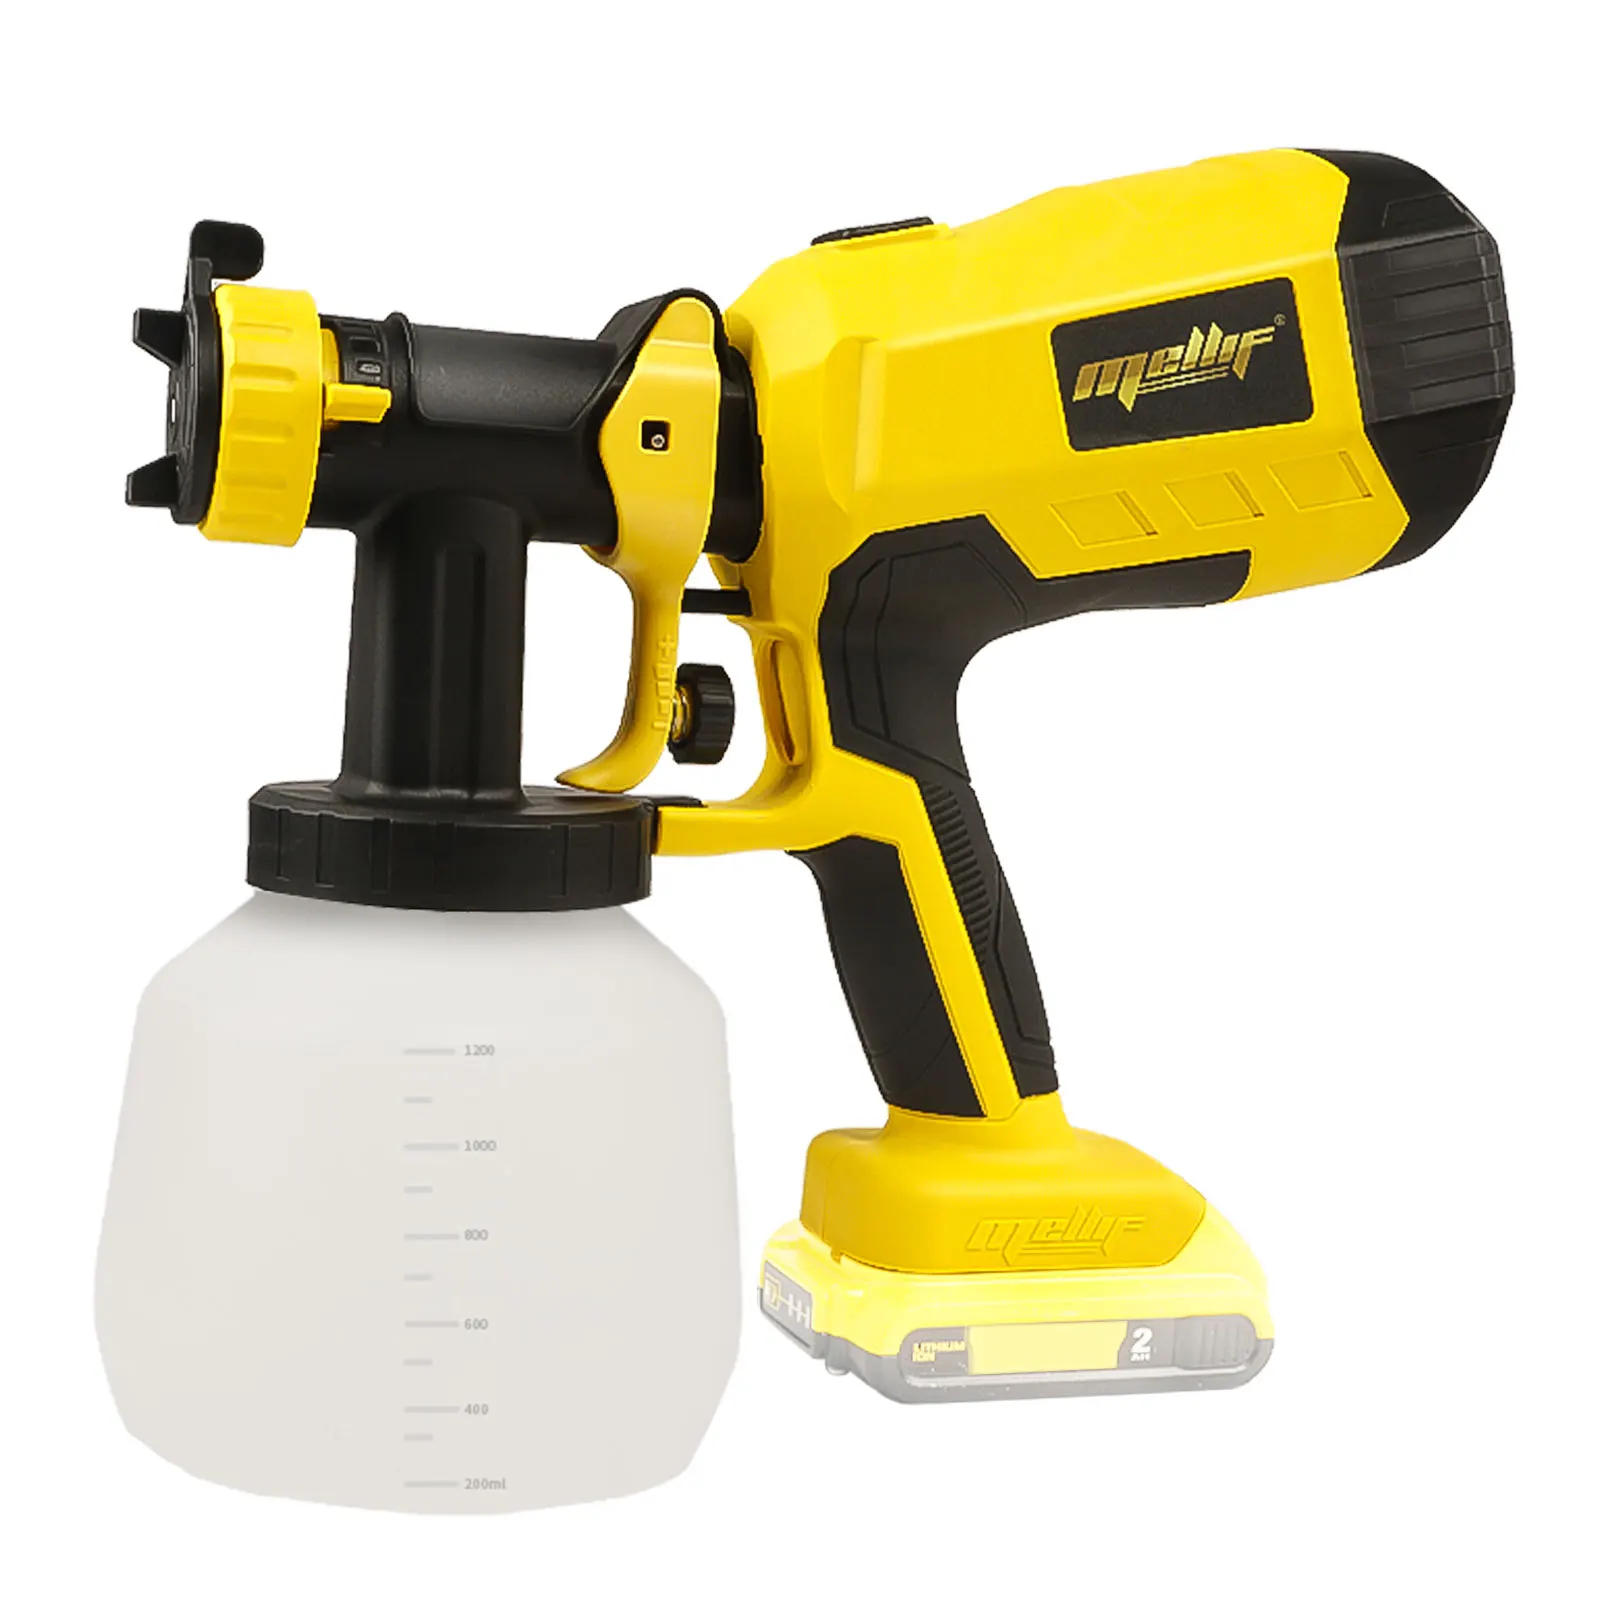 Spray Gun for dewalt 18v 20v max battery Cordless Paint Sprayer Gun with 3 Spray Patterns for Painting Ceiling Fence(NO Battery)